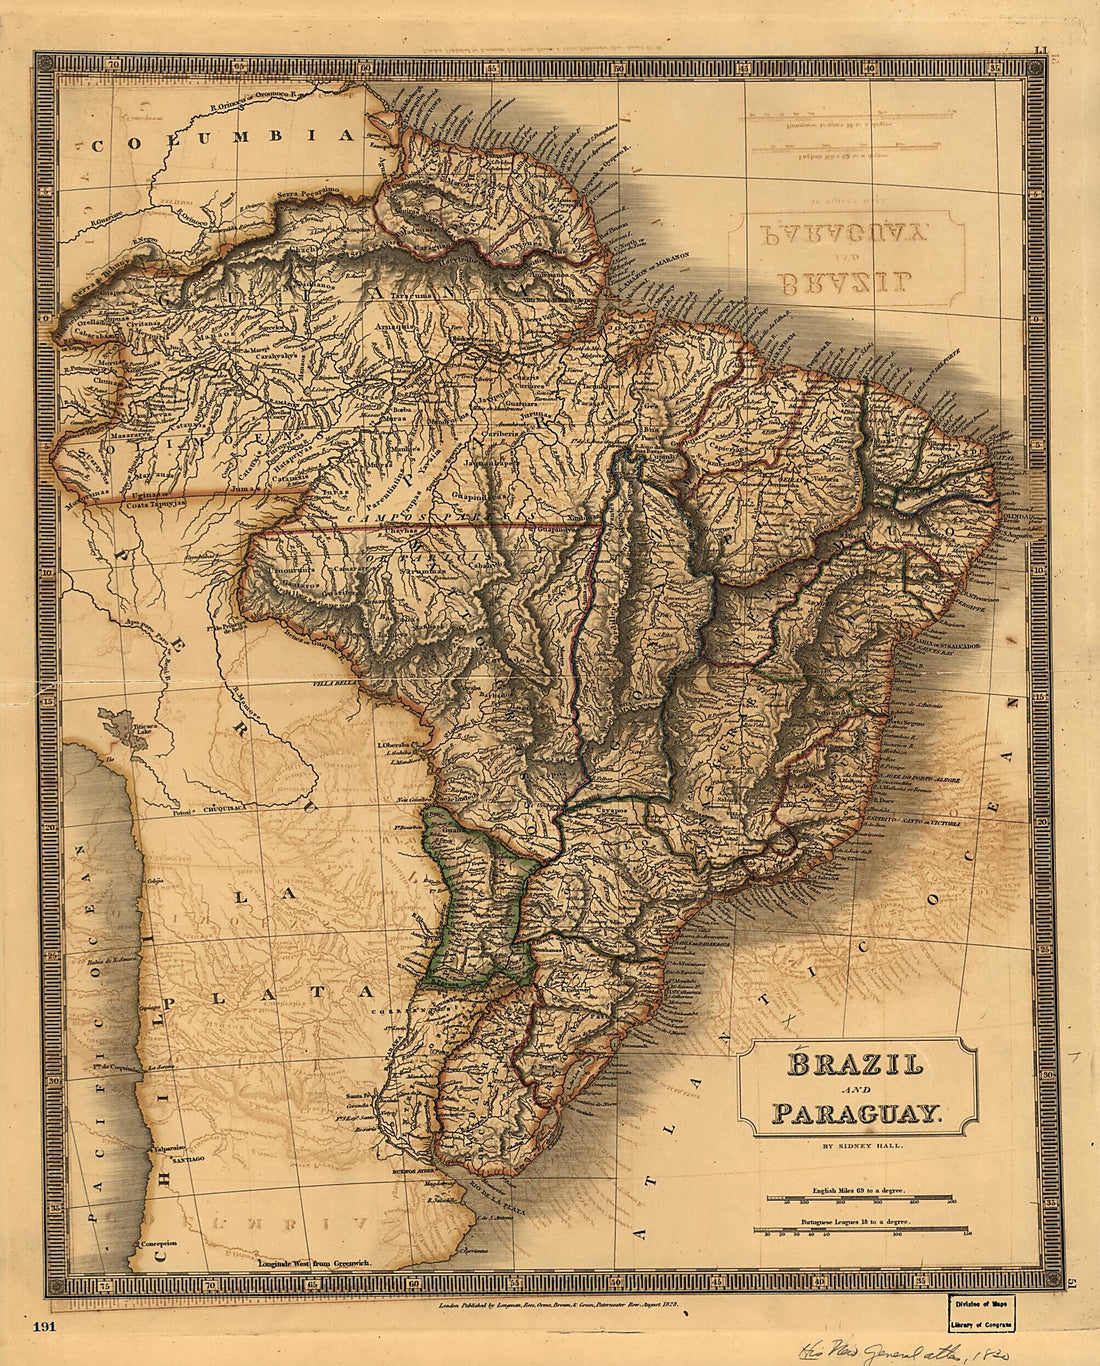 This old map of Brazil and Paraguay from 1828 was created by Sidney Hall, Rees Longman in 1828